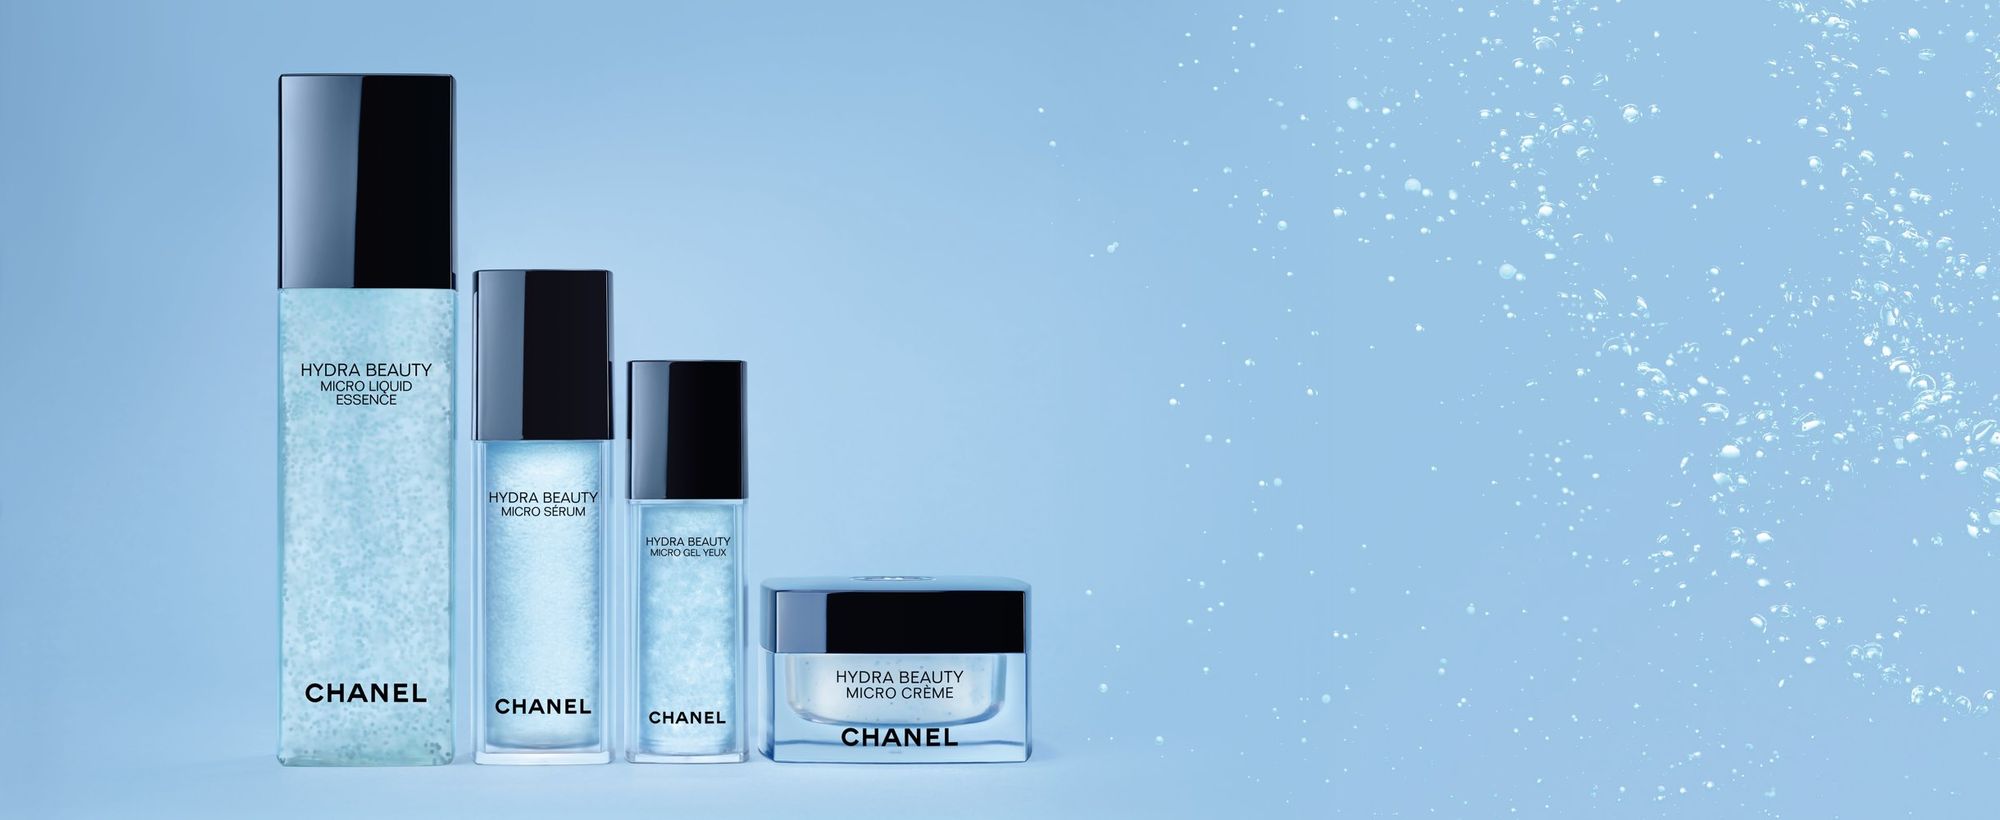 Chanel Review > Hydra Beauty Overview - Is Expensive Skincare Worth It?